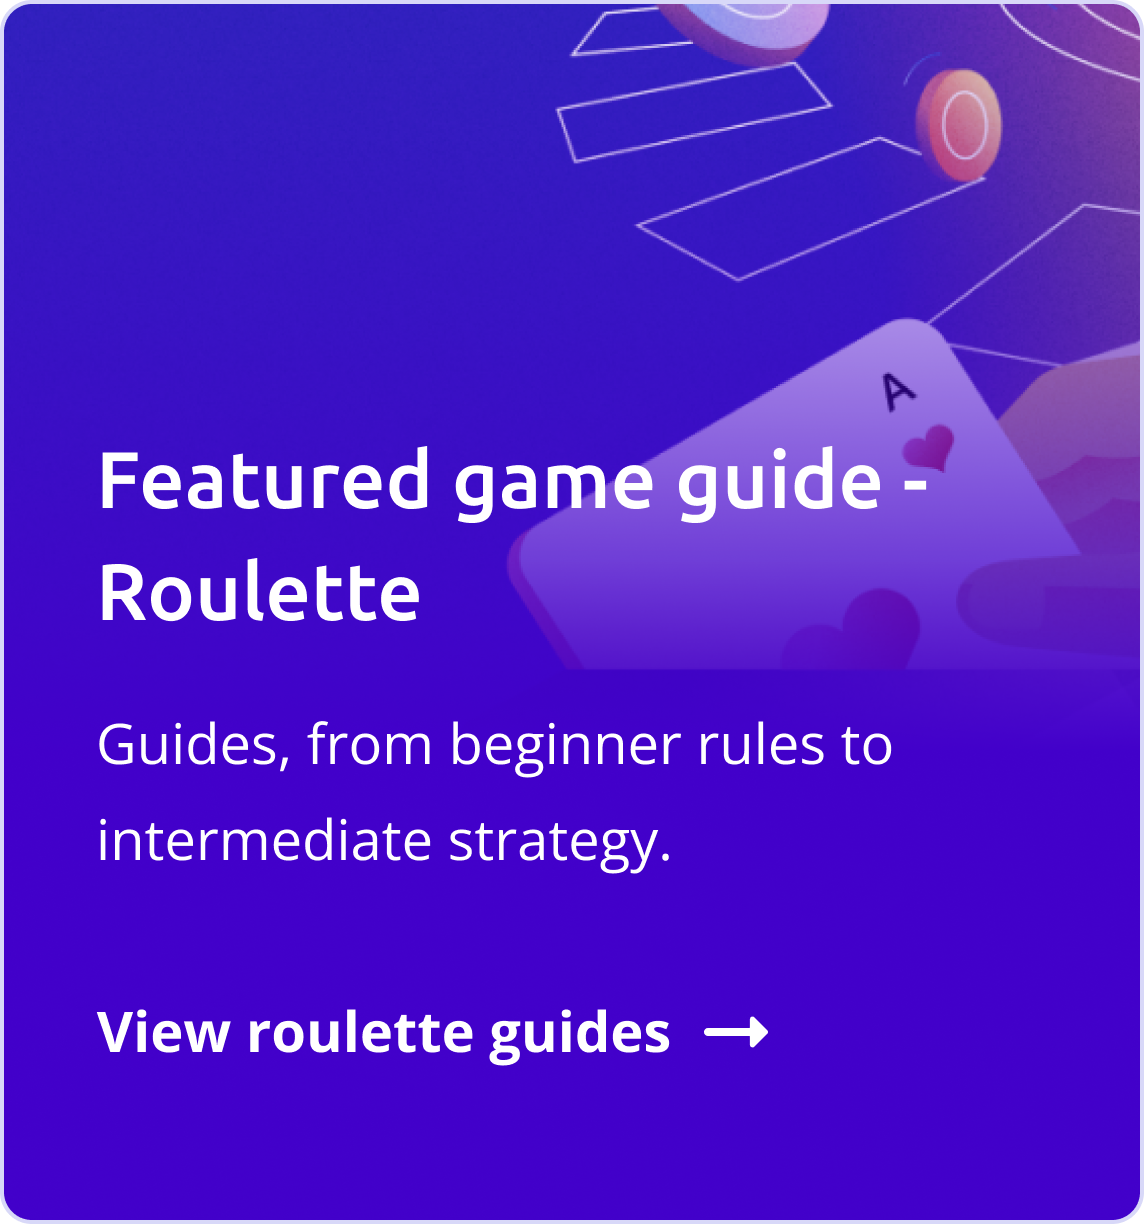 Featured game guide - Roulette